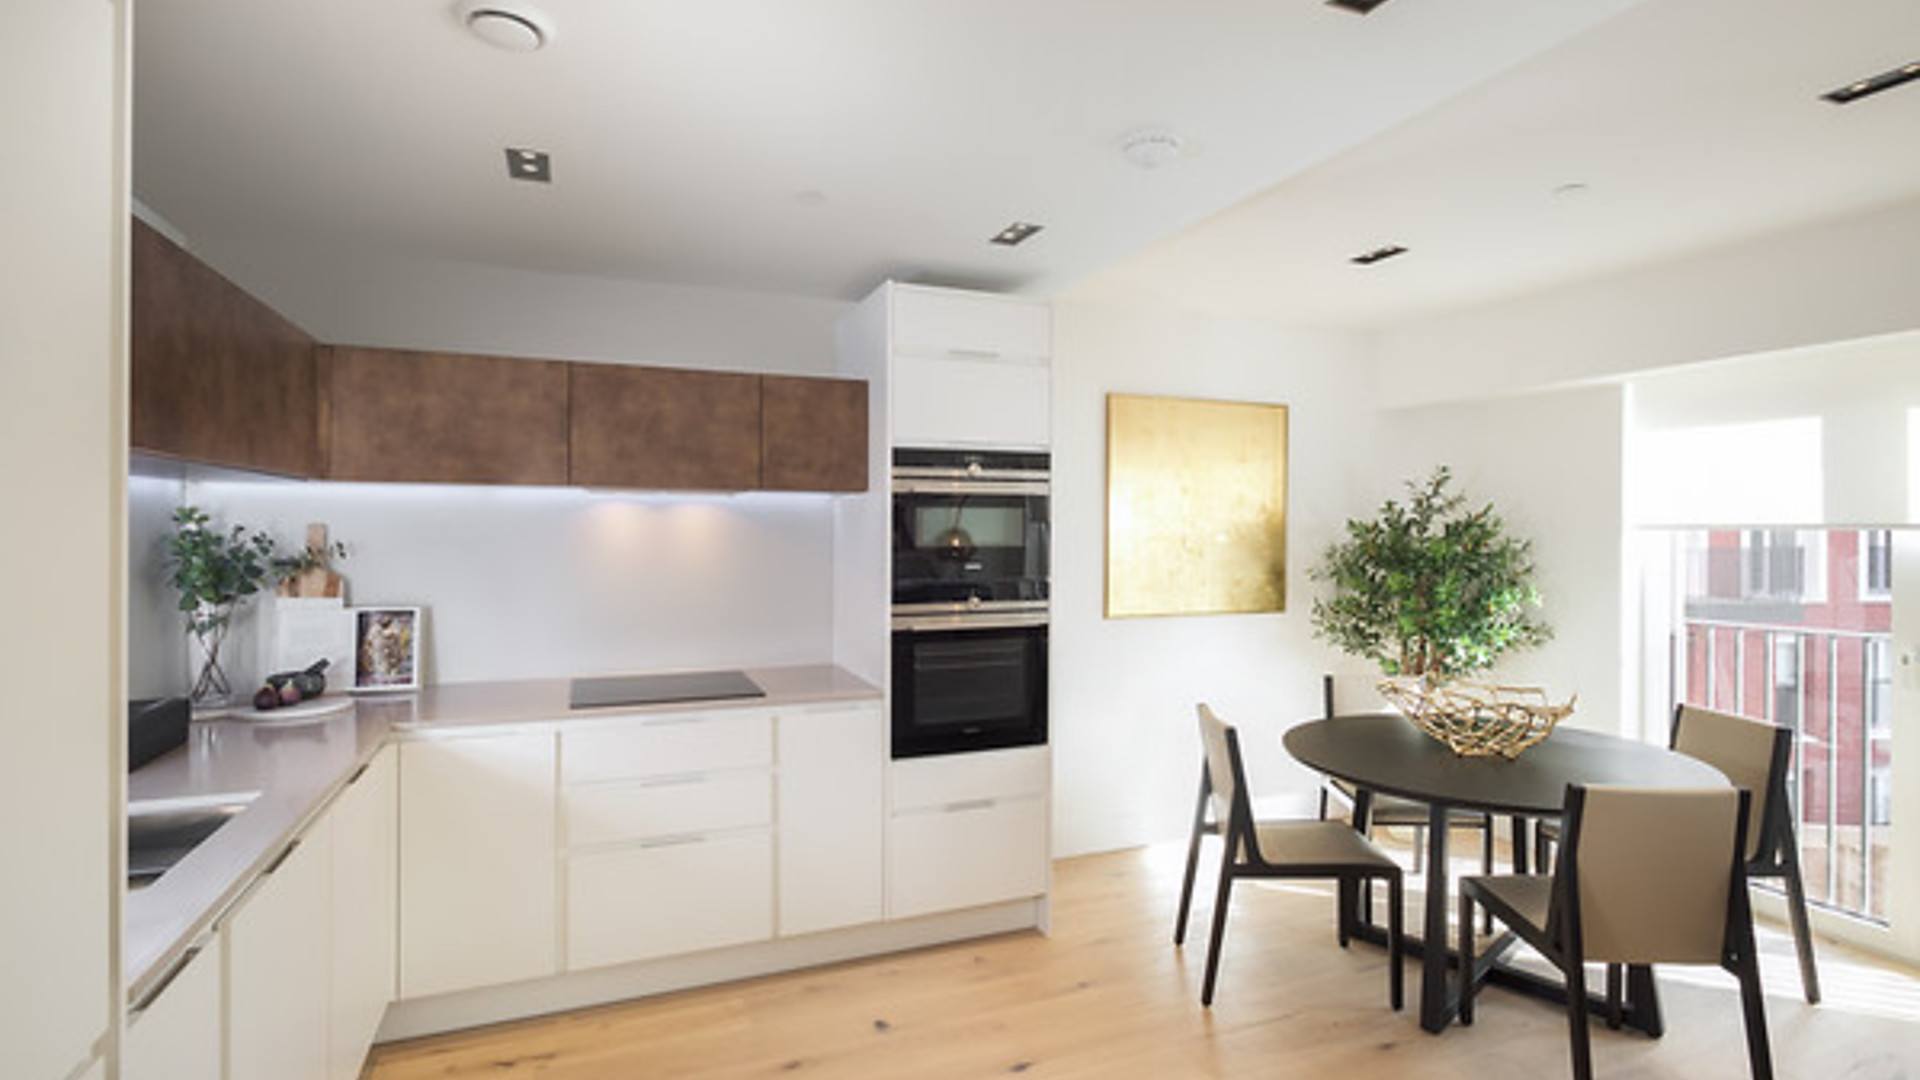 Apartments to Rent by a2dominion at Keybridge, Lambeth, SW8, kitchen